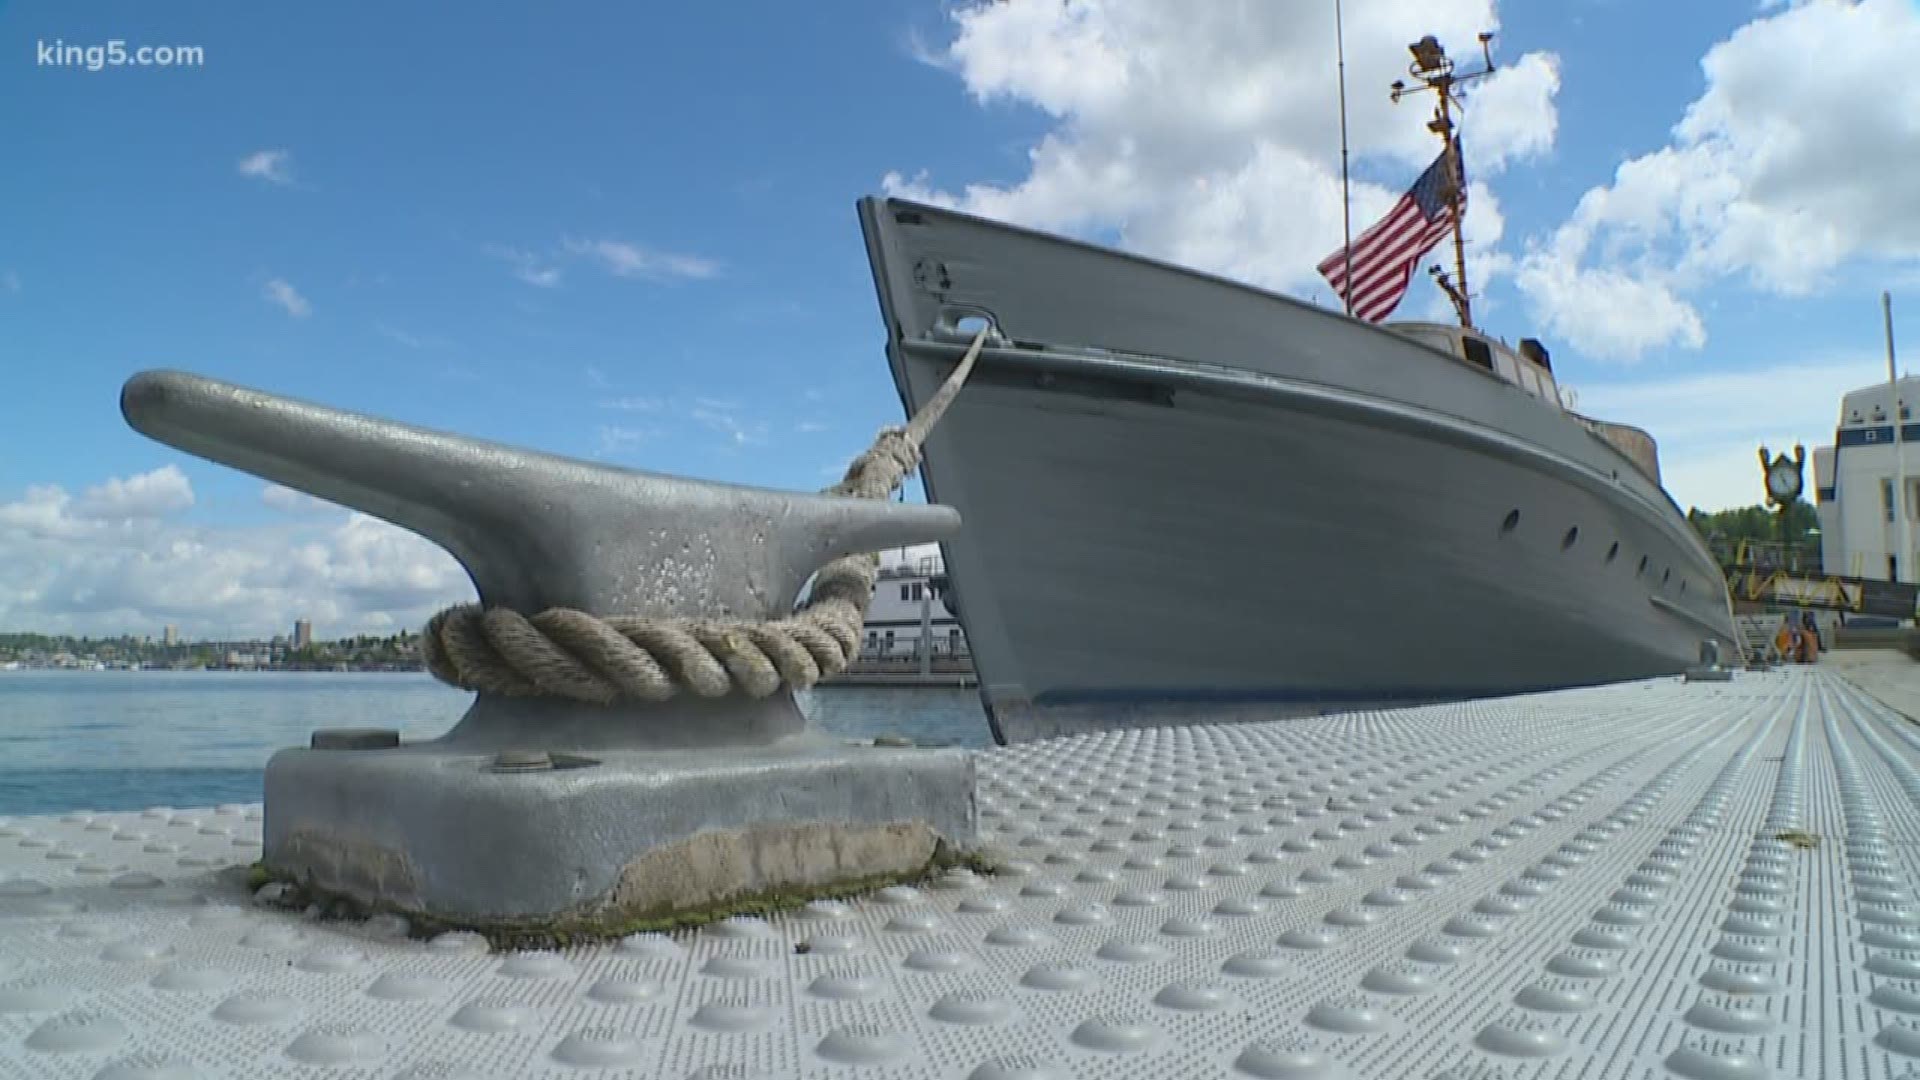 A U.S. Coast Guard cutter that served in D-Day on June 6, 1944 is now docked in South Lake Union through Sunday. The vessel, which rescued wounded soldiers in Normandy 75 years ago, nearly wound up in a scrap yard — until a Washington couple saved it. KING 5's Ted Land reports